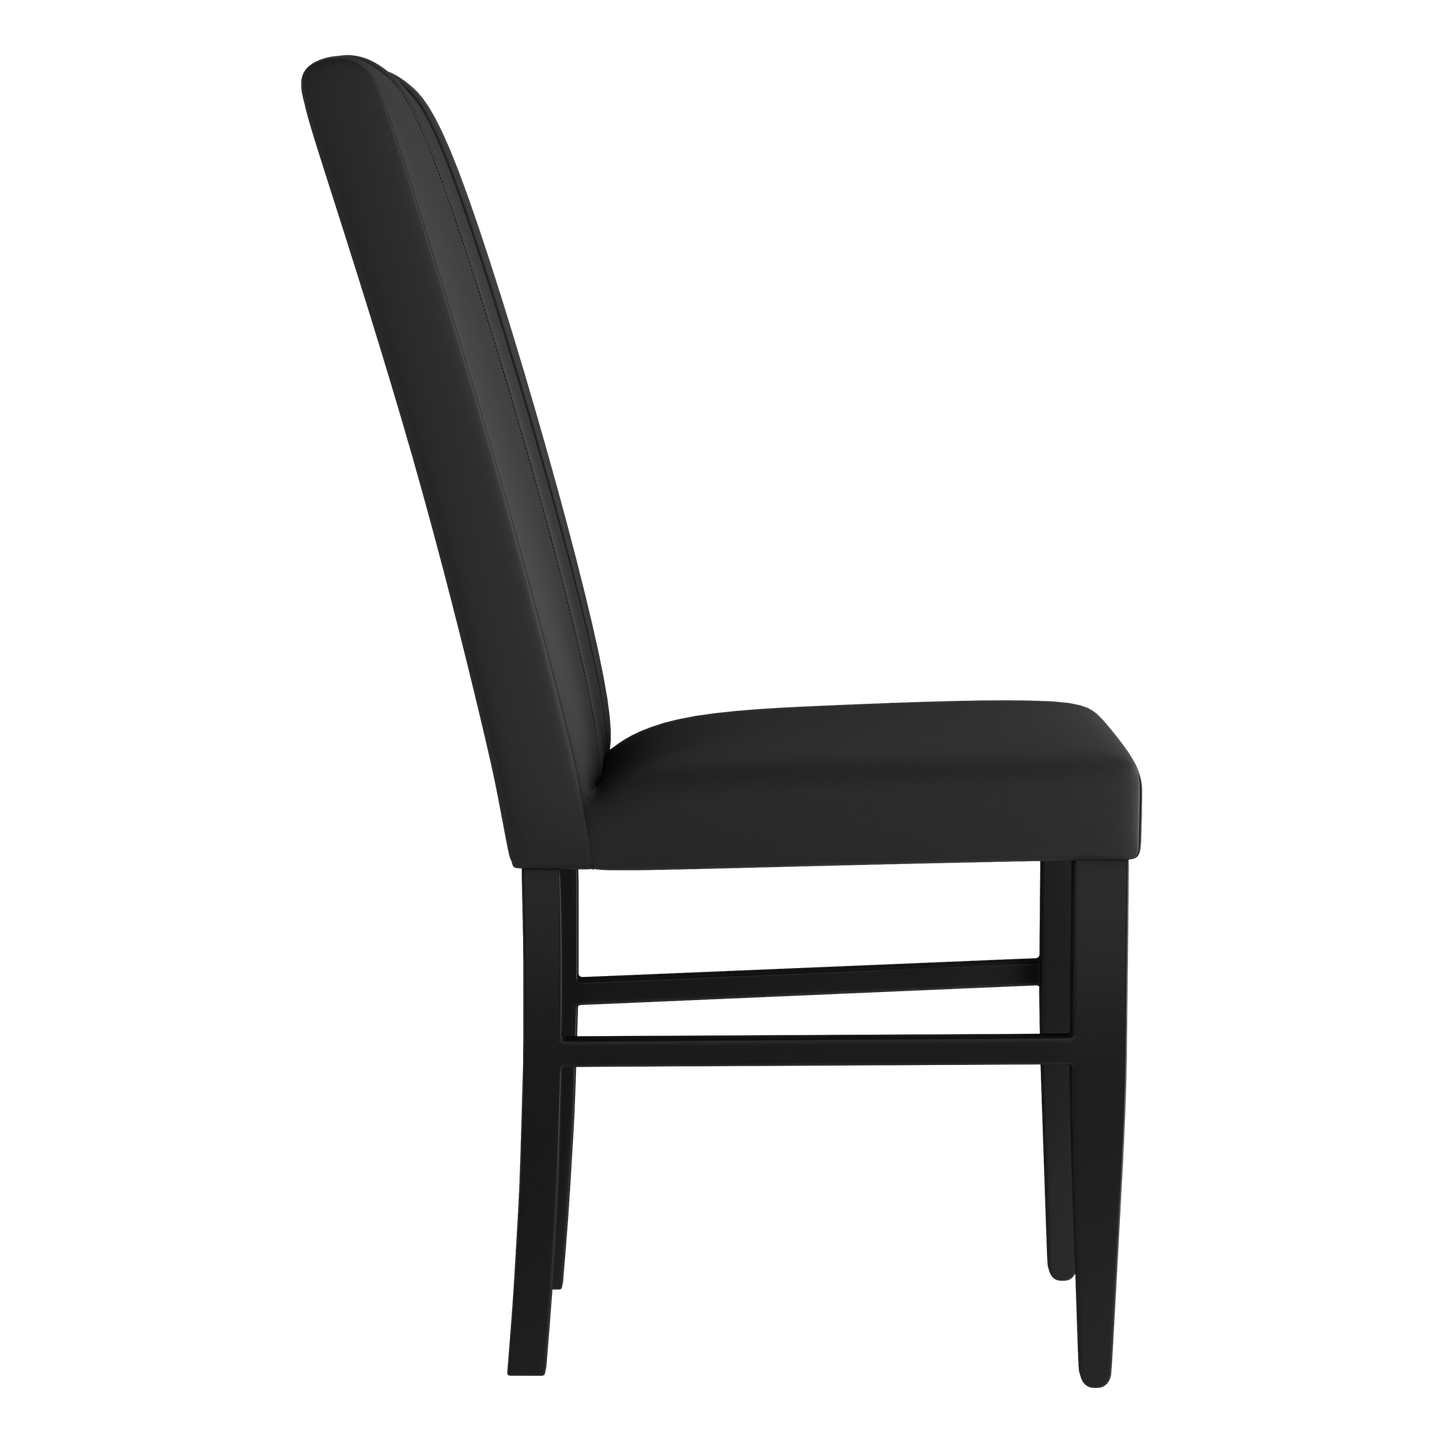 Side Chair 2000 with Vermont Catamounts Logo Set of 2